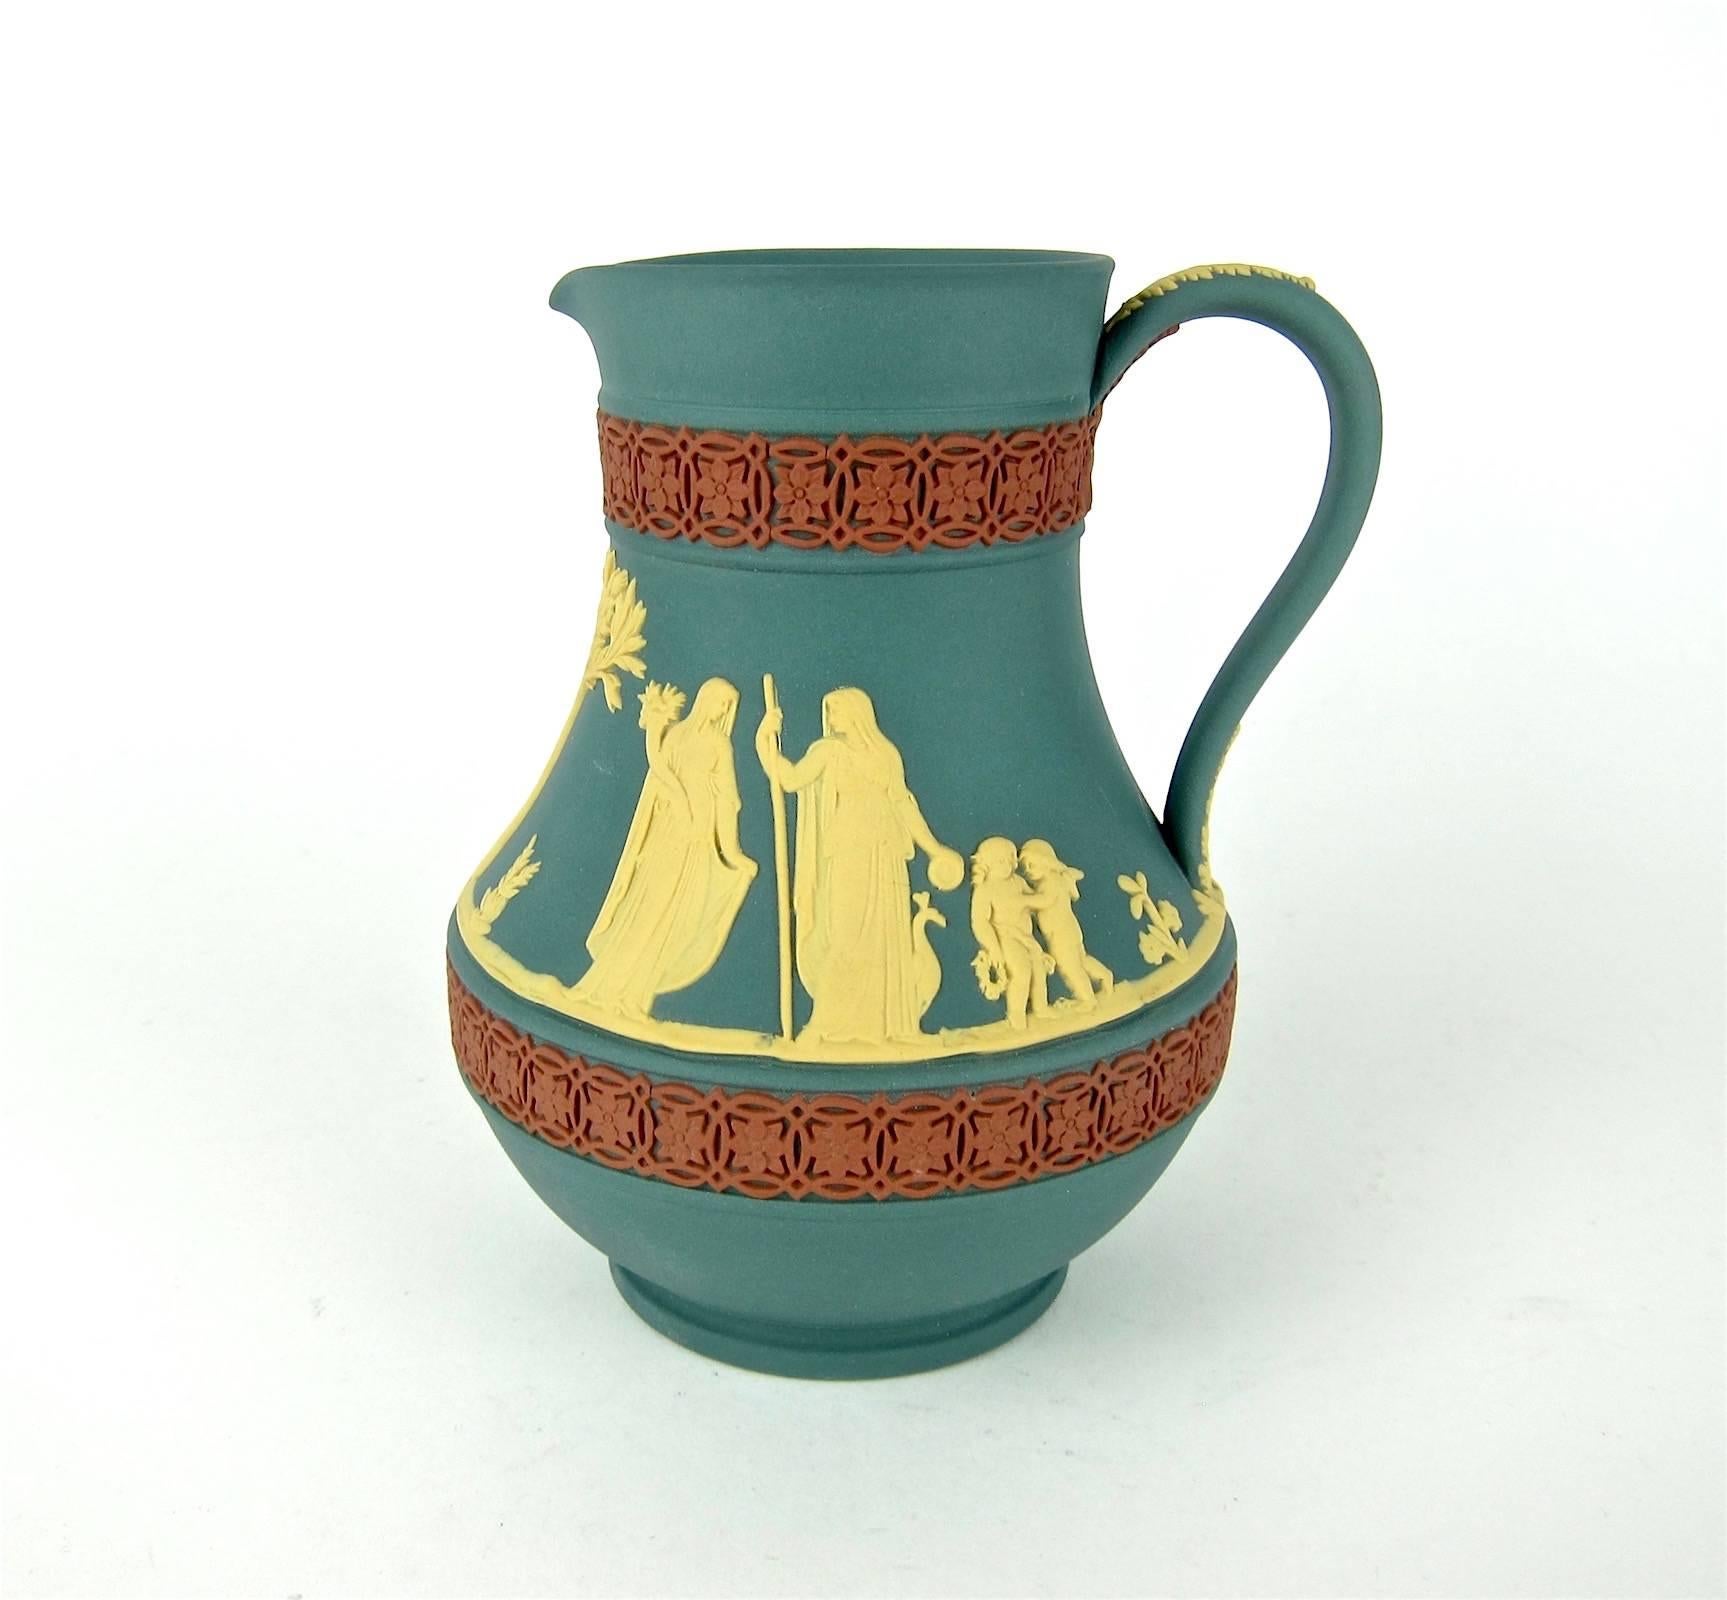 A vintage tricolor 'Etruscan' jug in teal, cane and terra cotta jasper ware from Wedgwood of England. The limited edition pitcher was introduced in 1986 to celebrate the opening of the Wedgwood boutique at Higbee's in Cleveland. The vessel comes